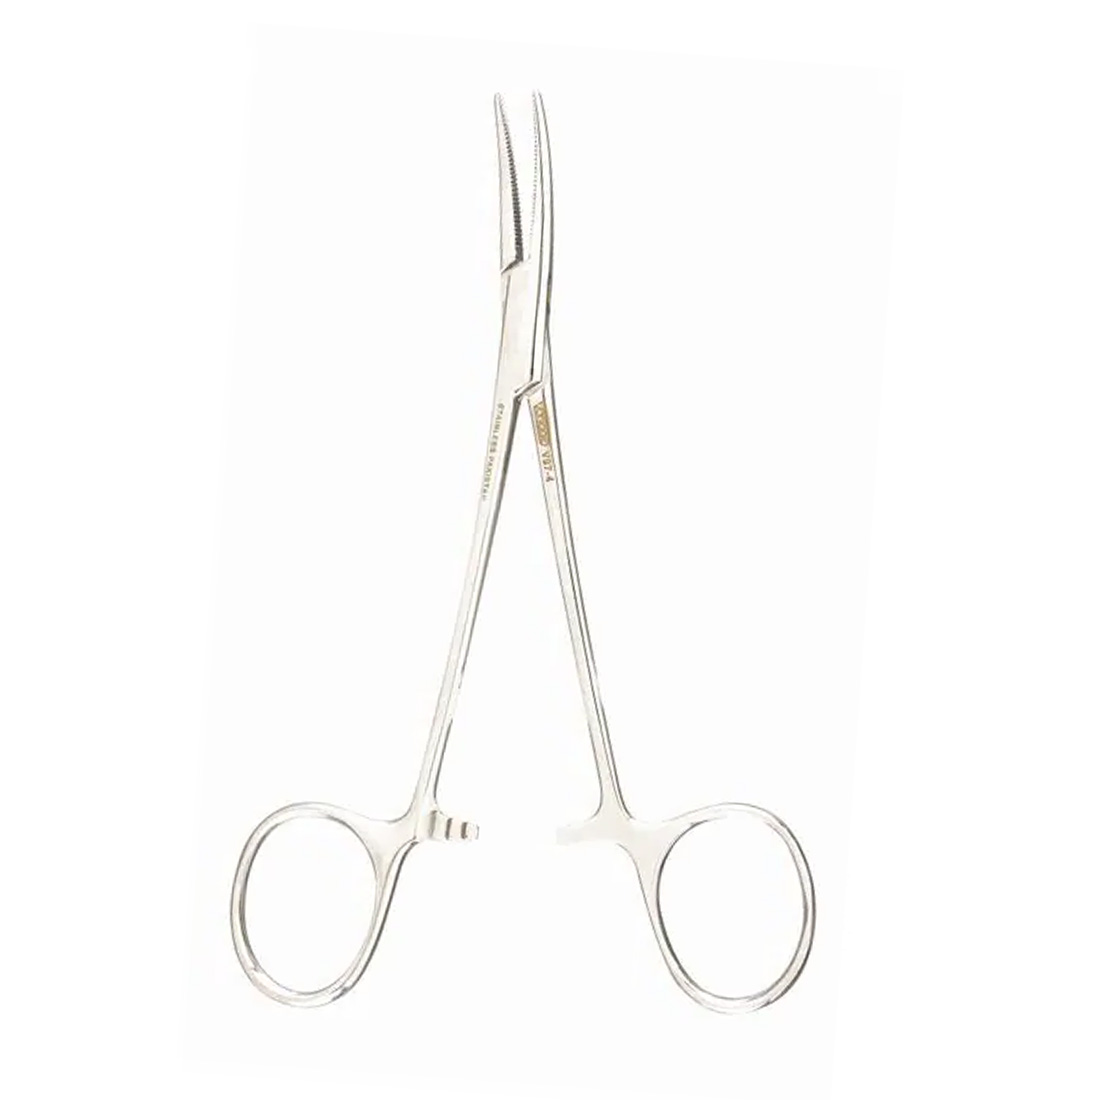 Vantage® Halstead Mosquito Forceps Curved 5"